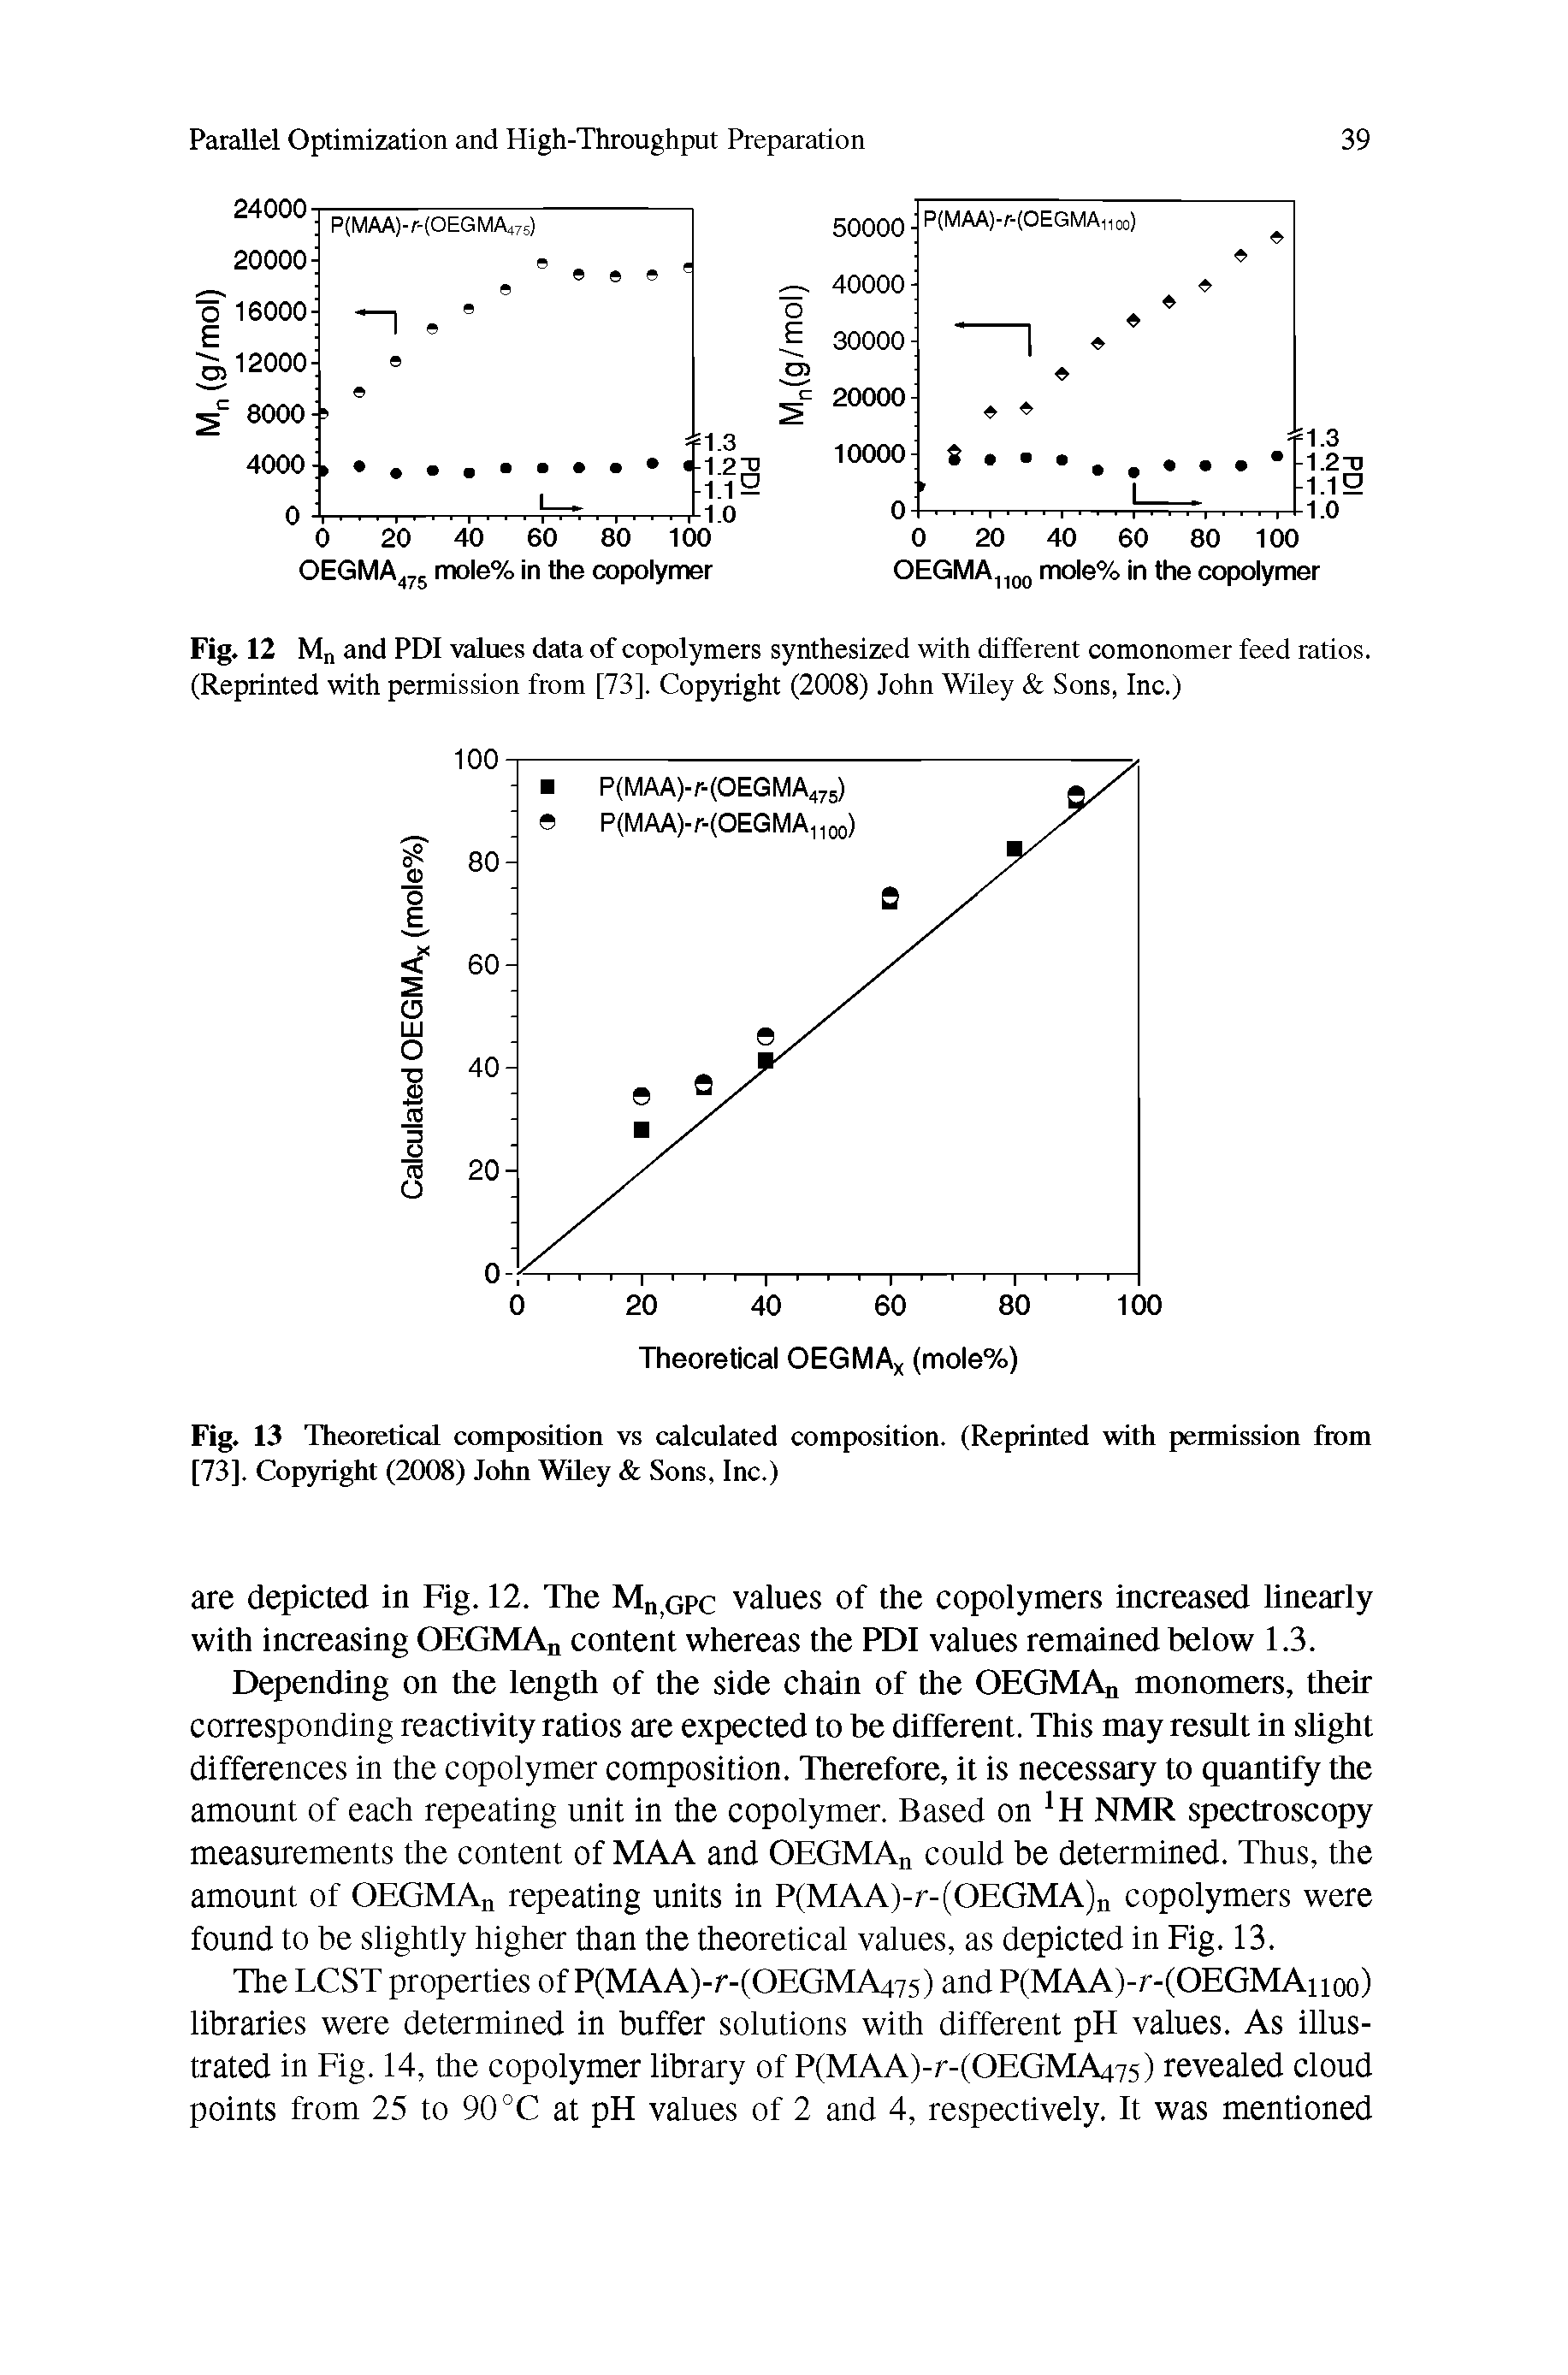 Fig. 12 MnandPDl values data of copolymers synthesized with different comonomer feed ratios. (Reprinted with permission from [73]. Copyright (2008) John Wiley Sons, Inc.)...